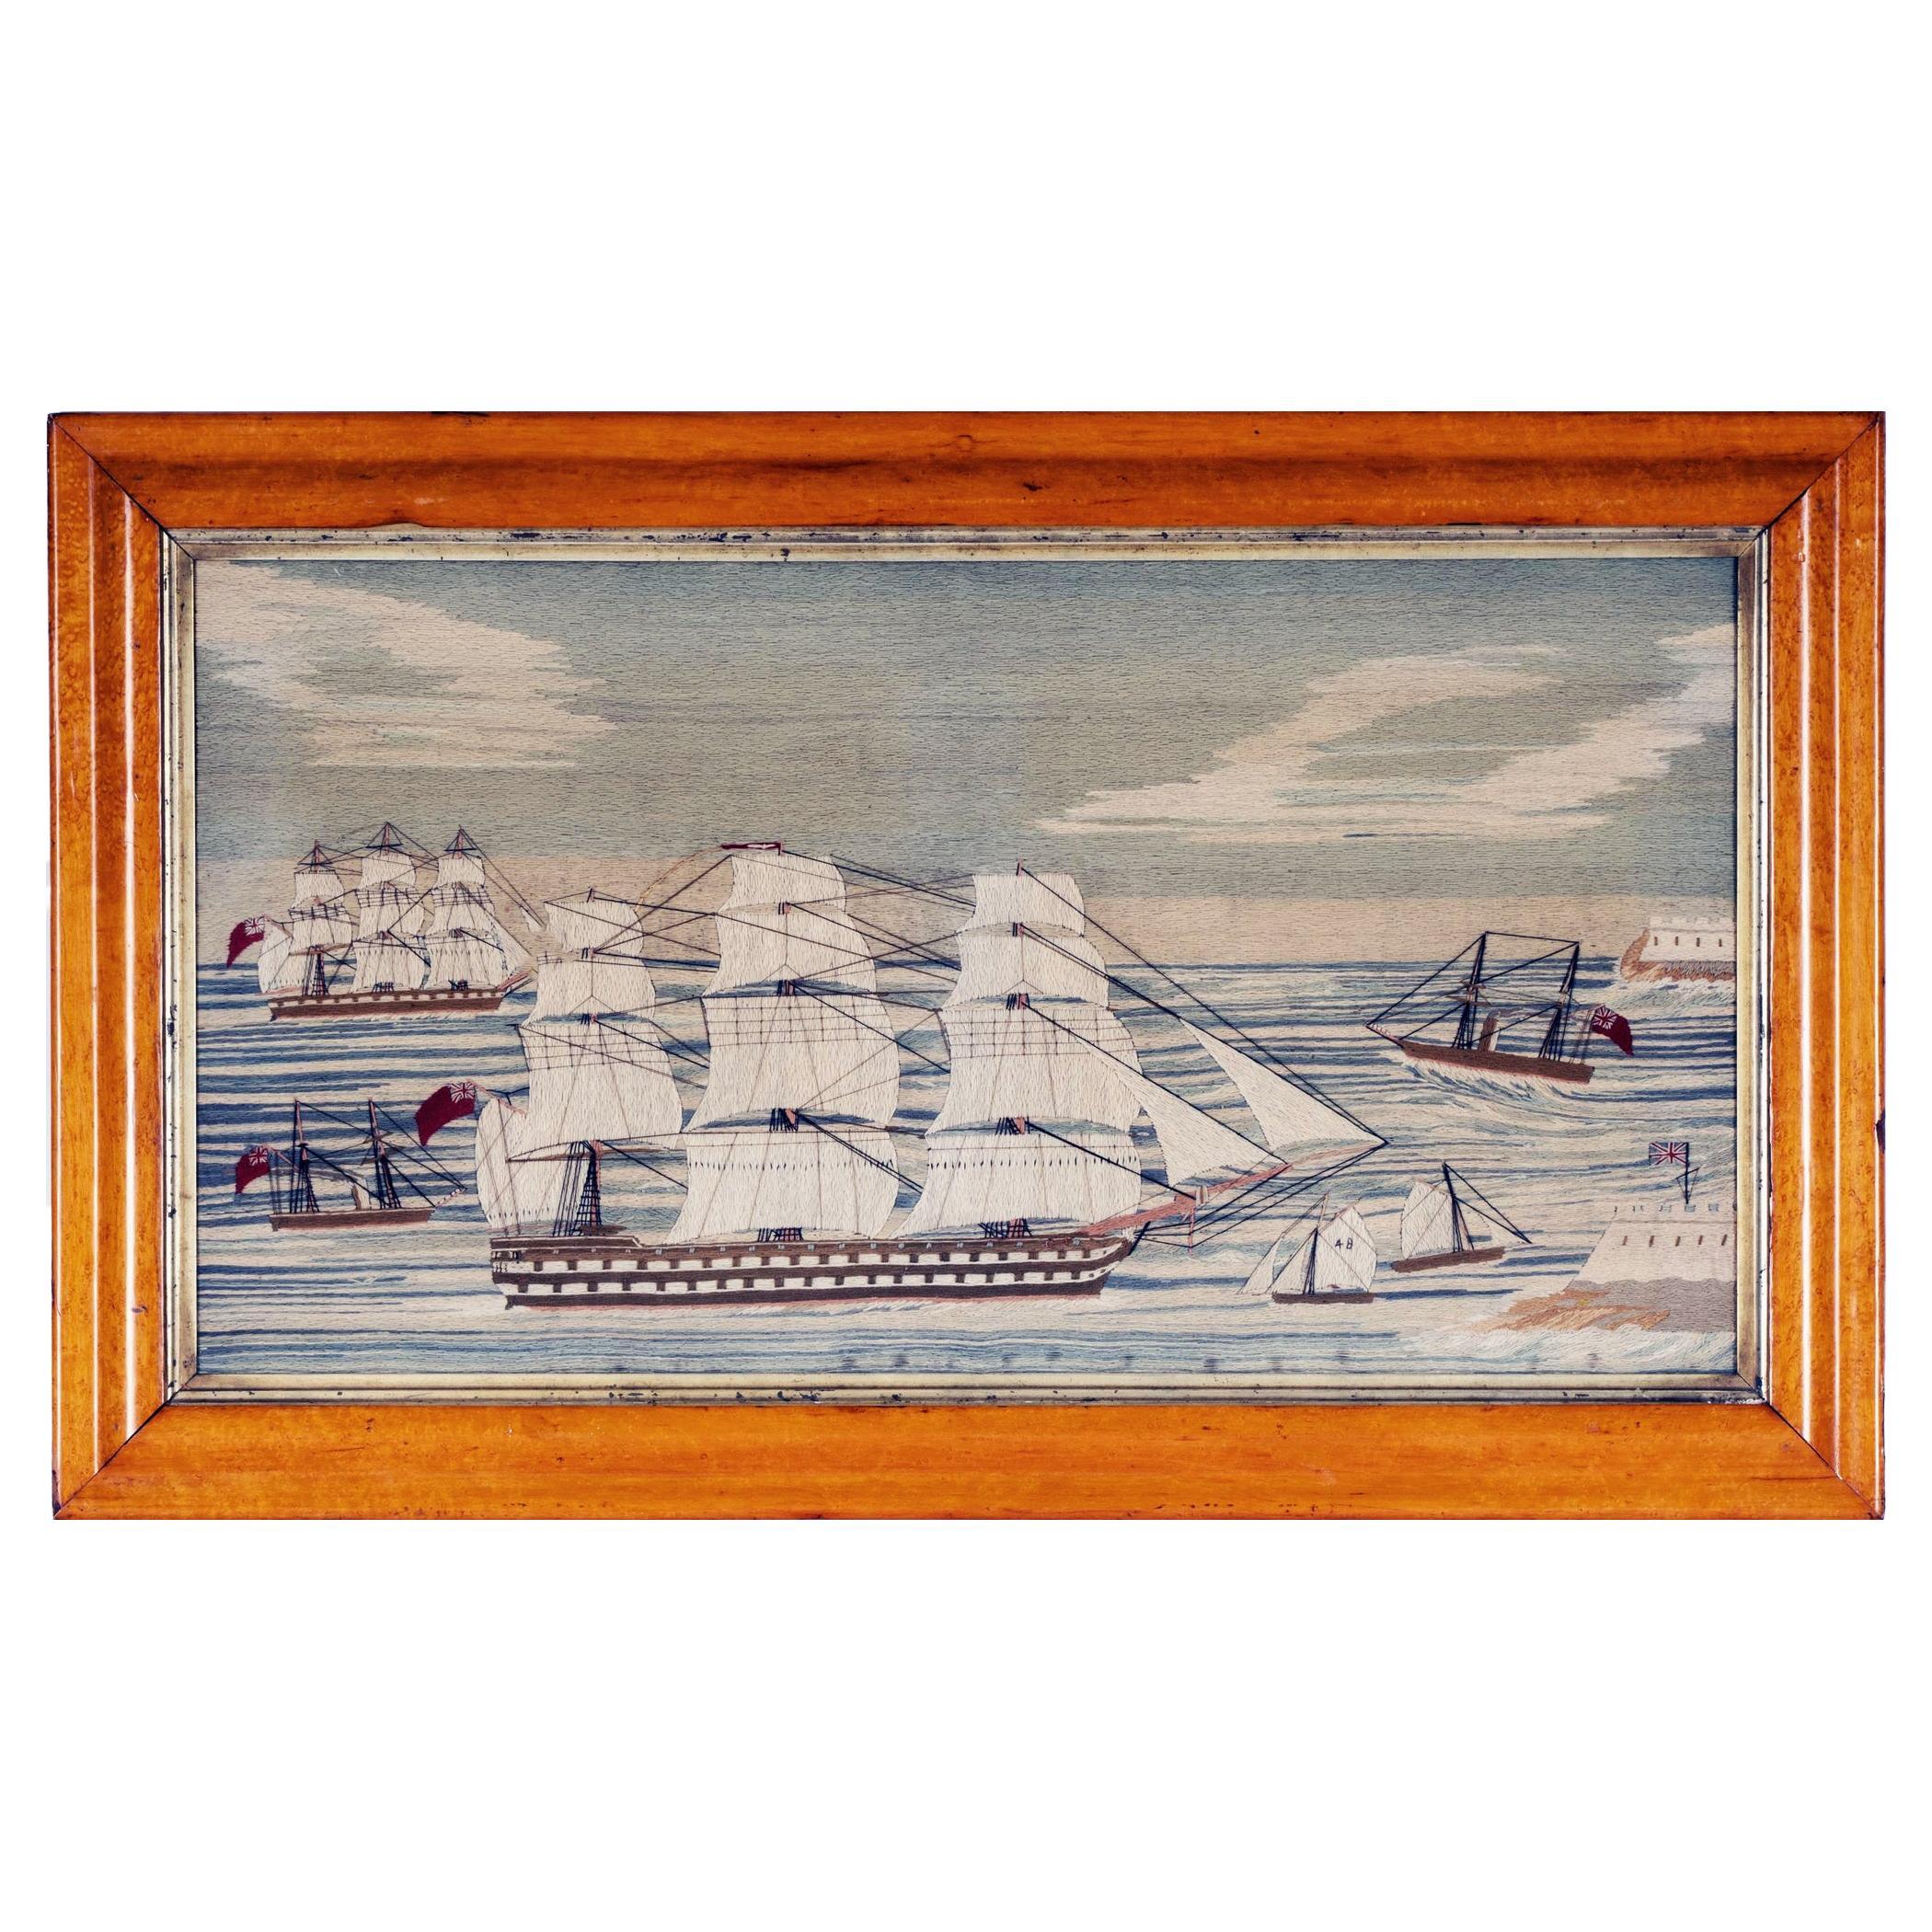 Sailor's Woolwork of HMS Conqueror Entering Malta Harbor with Five Other Ships